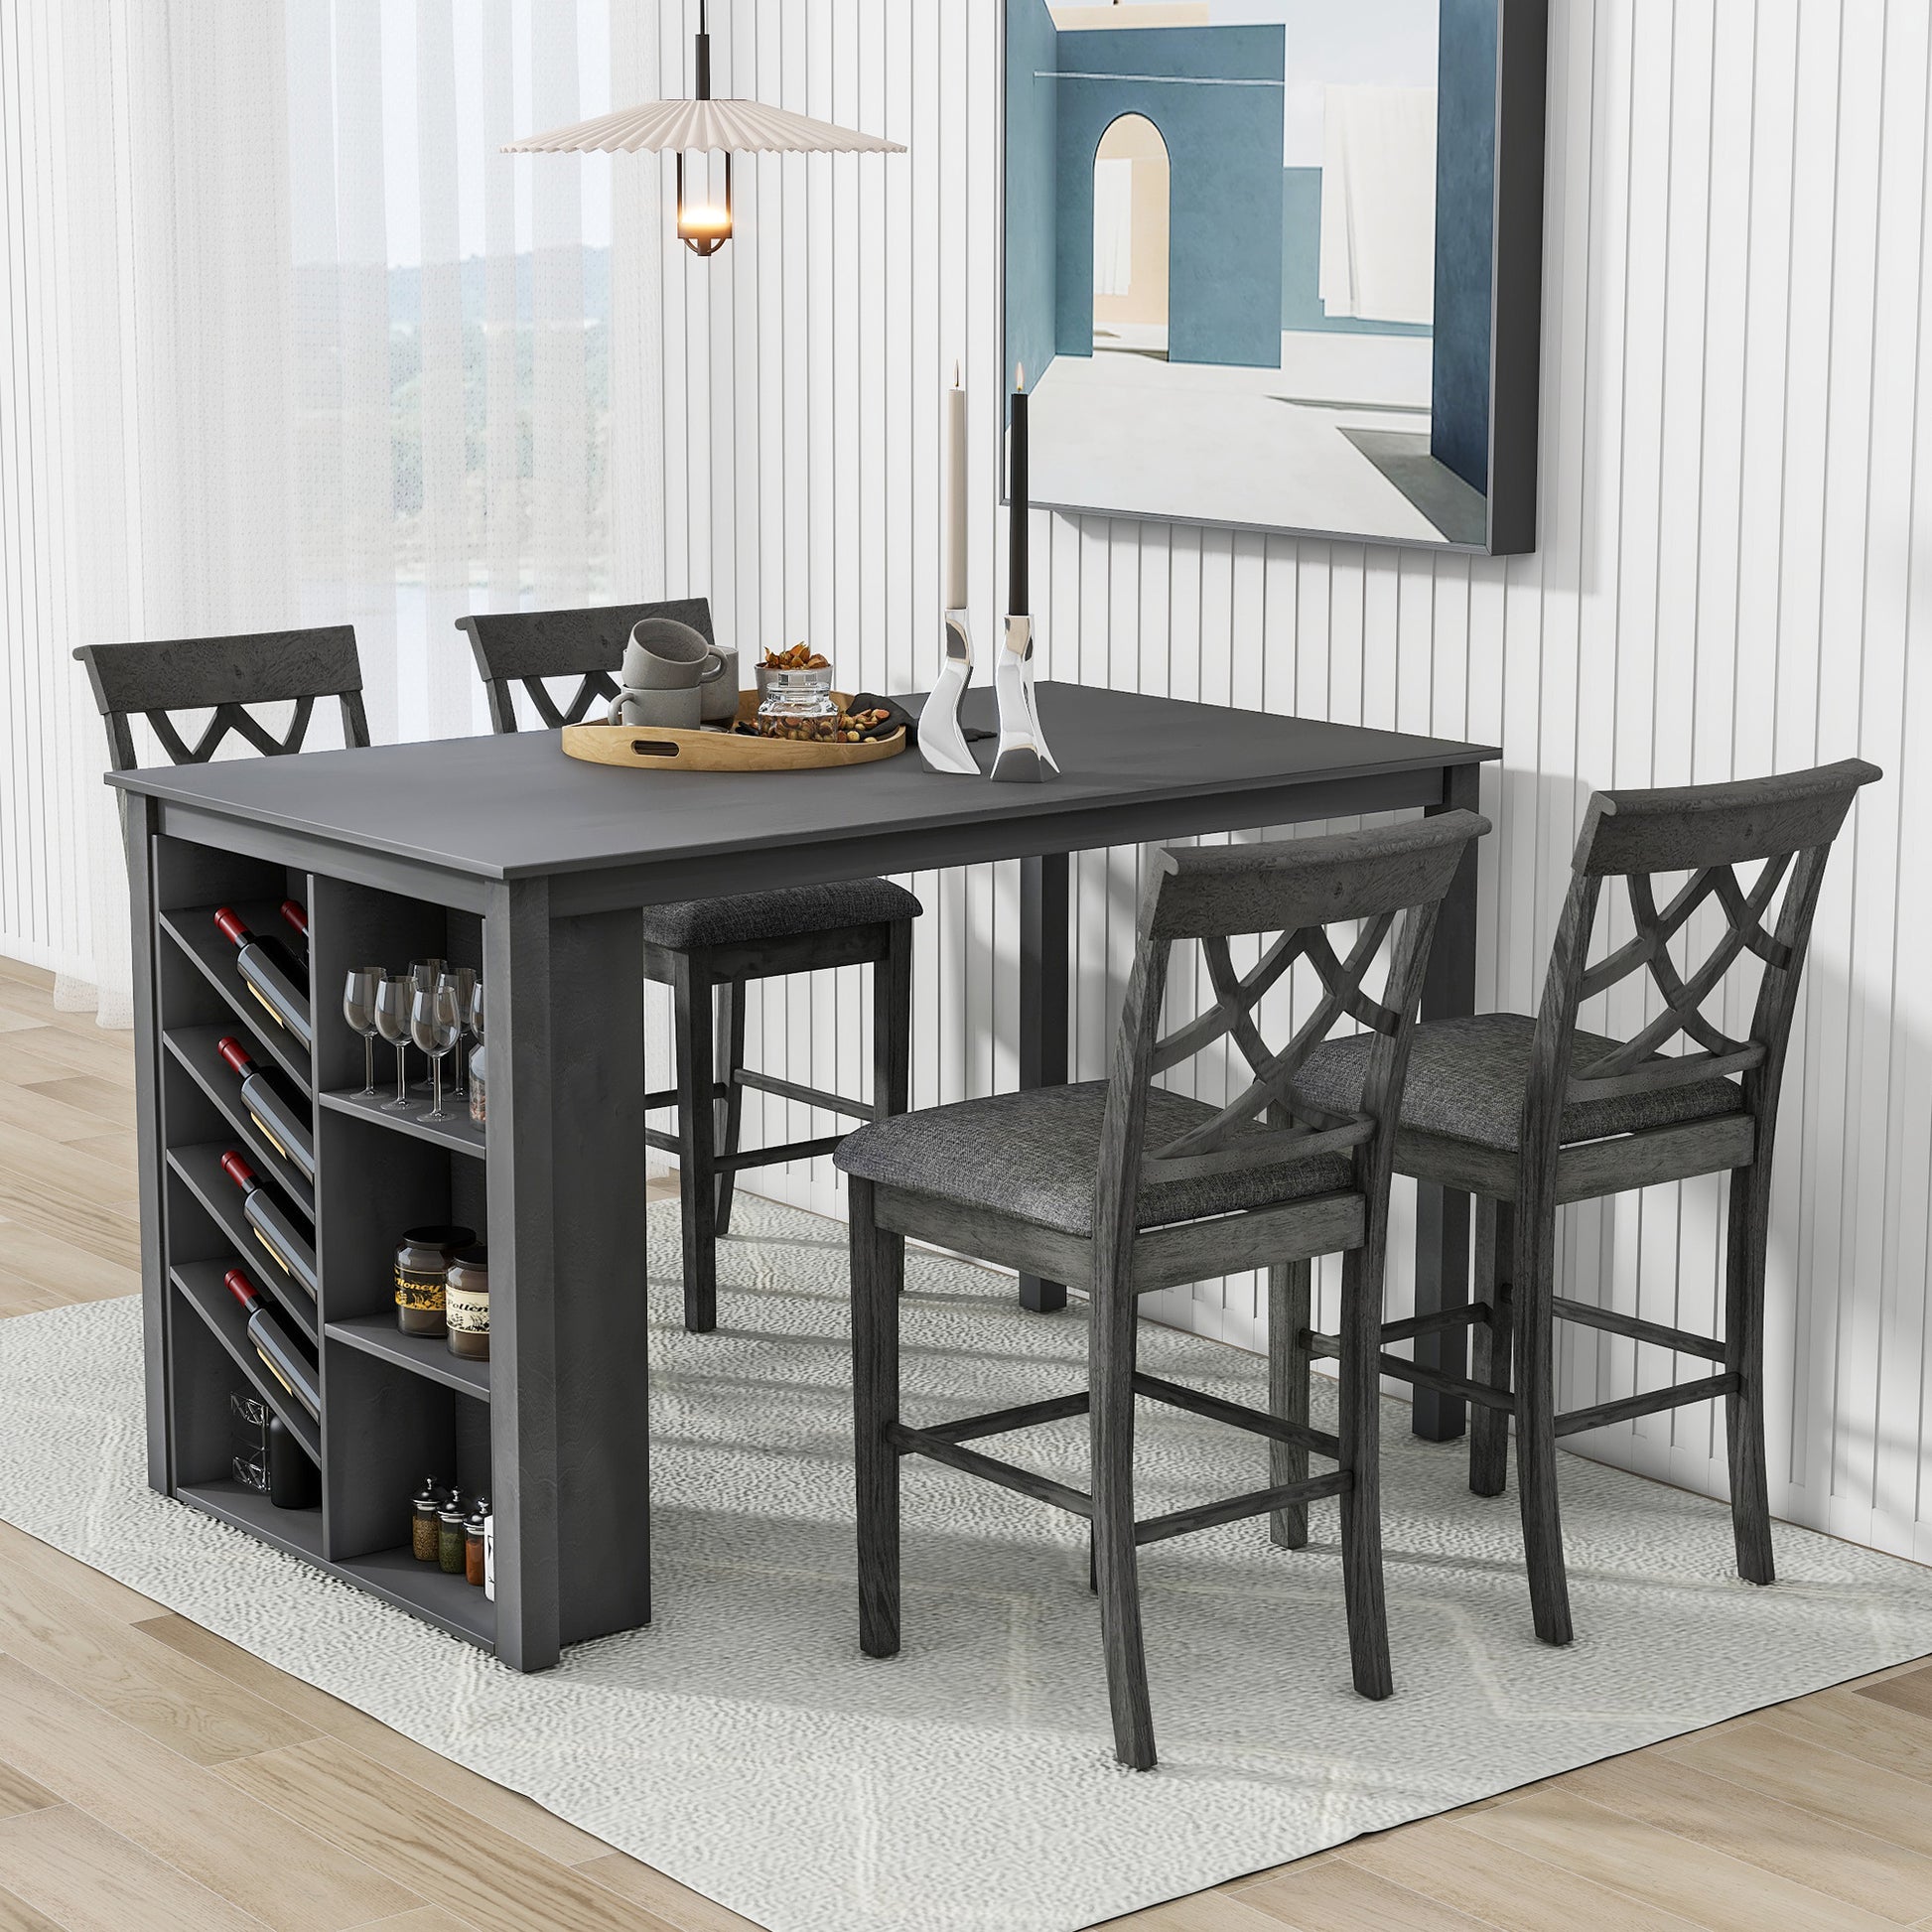 TOPMAX Counter Height 5-piece Solid Wood Dining Table Set, 59*35.4Inch Table with Wine Rack and 4 Upholstered Chairs, Grey - Enova Luxe Home Store